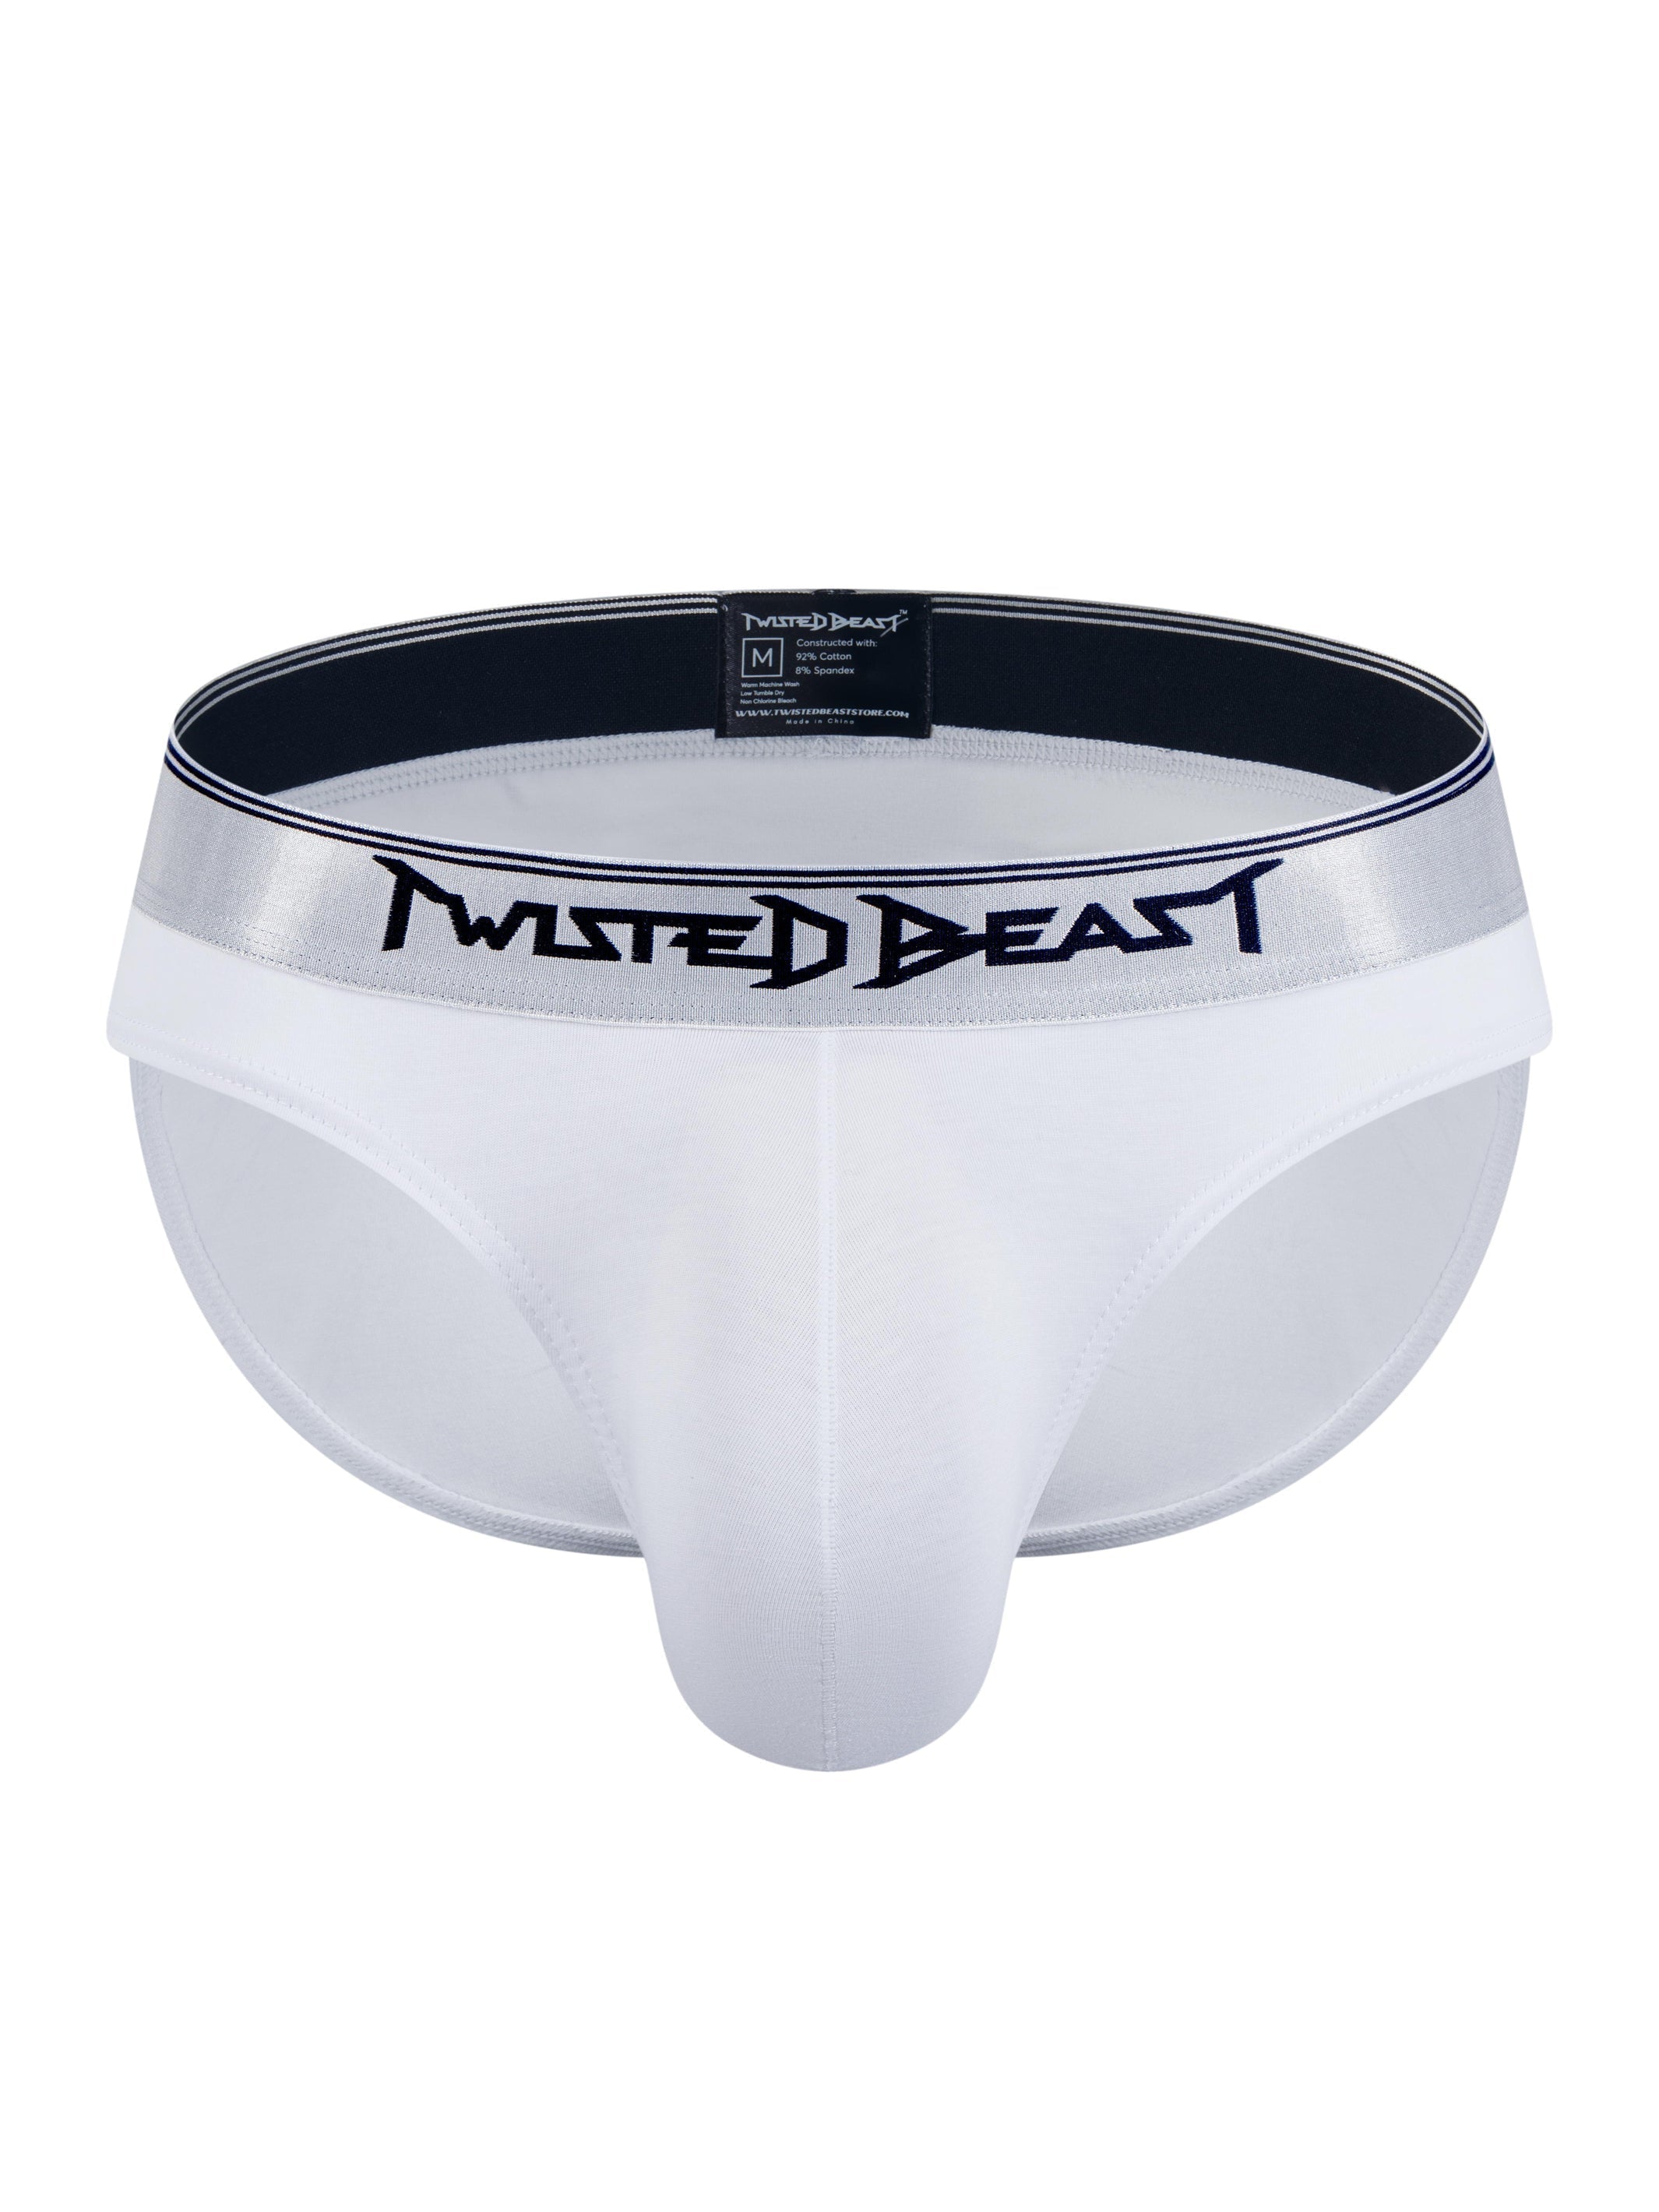 A frontal product photo of a pair of Twisted Beast Y2K Brief's in White.